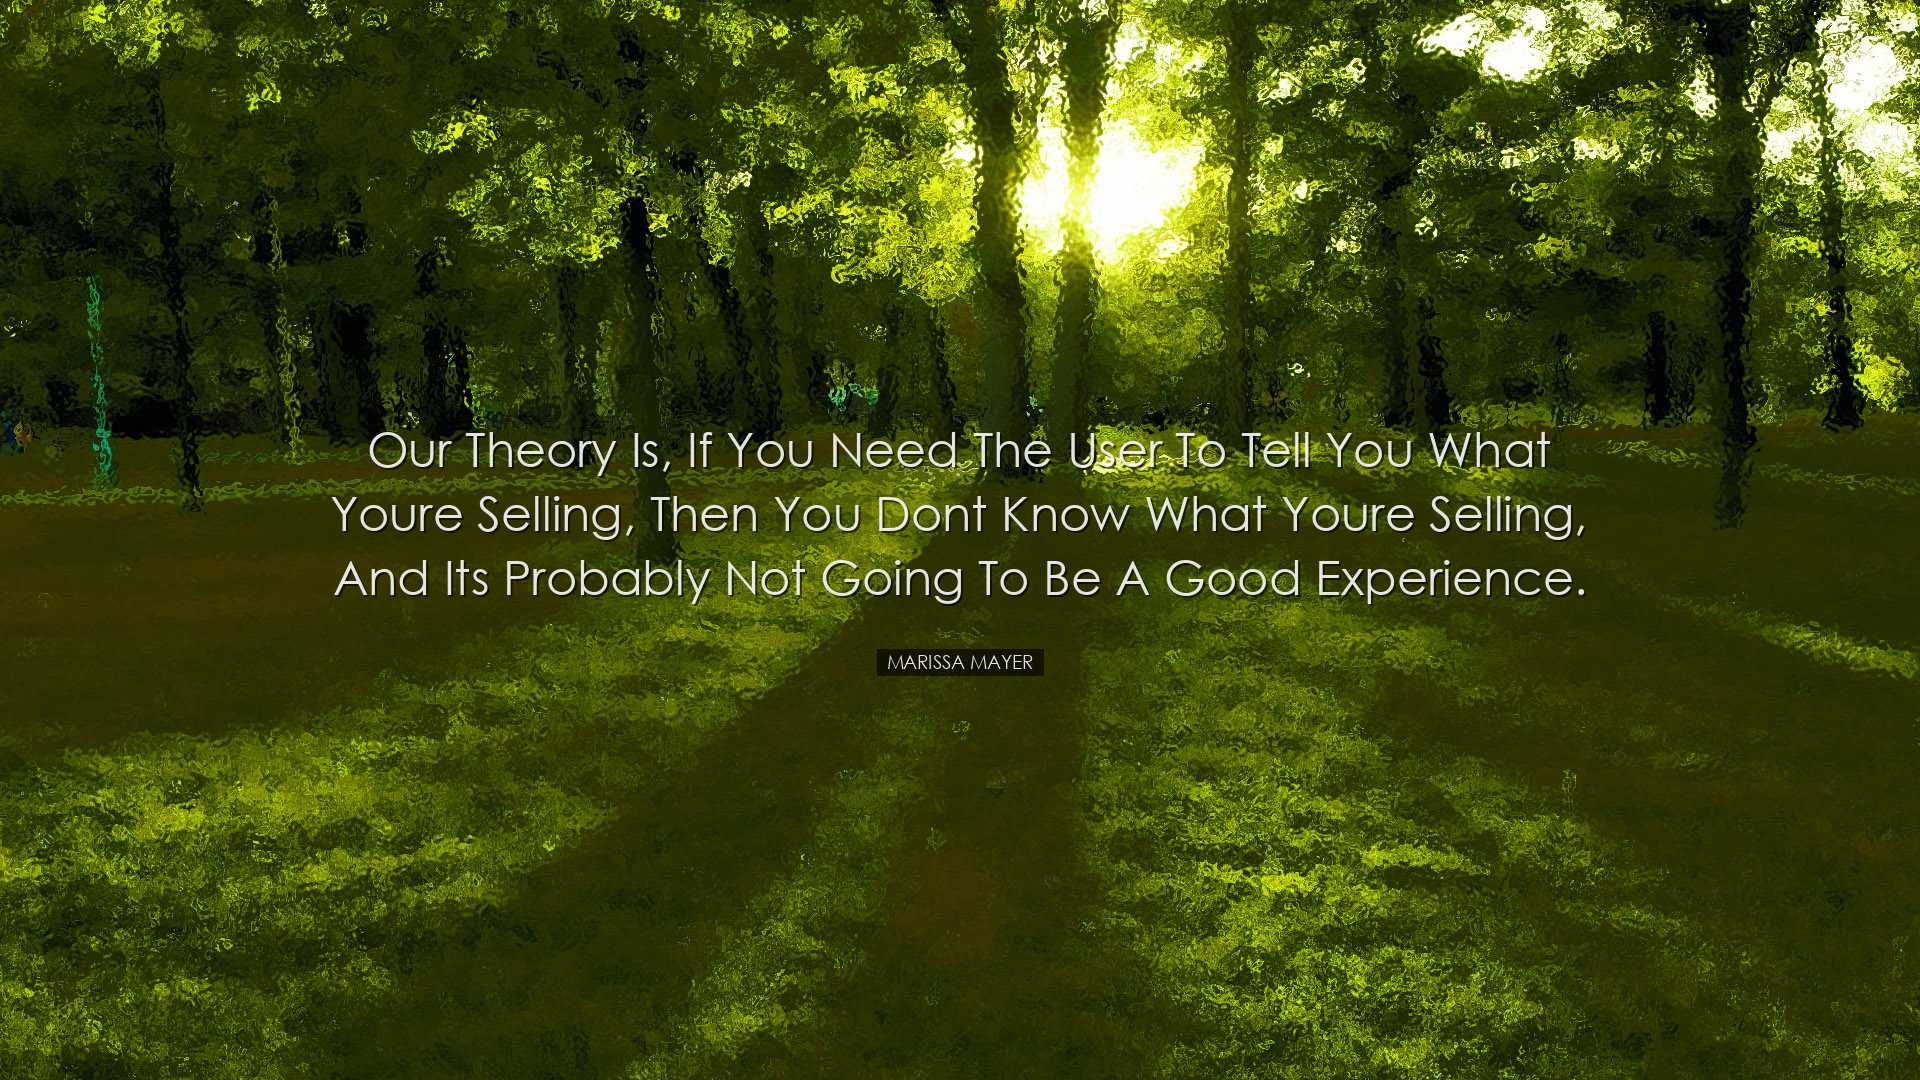 Our theory is, if you need the user to tell you what youre selling